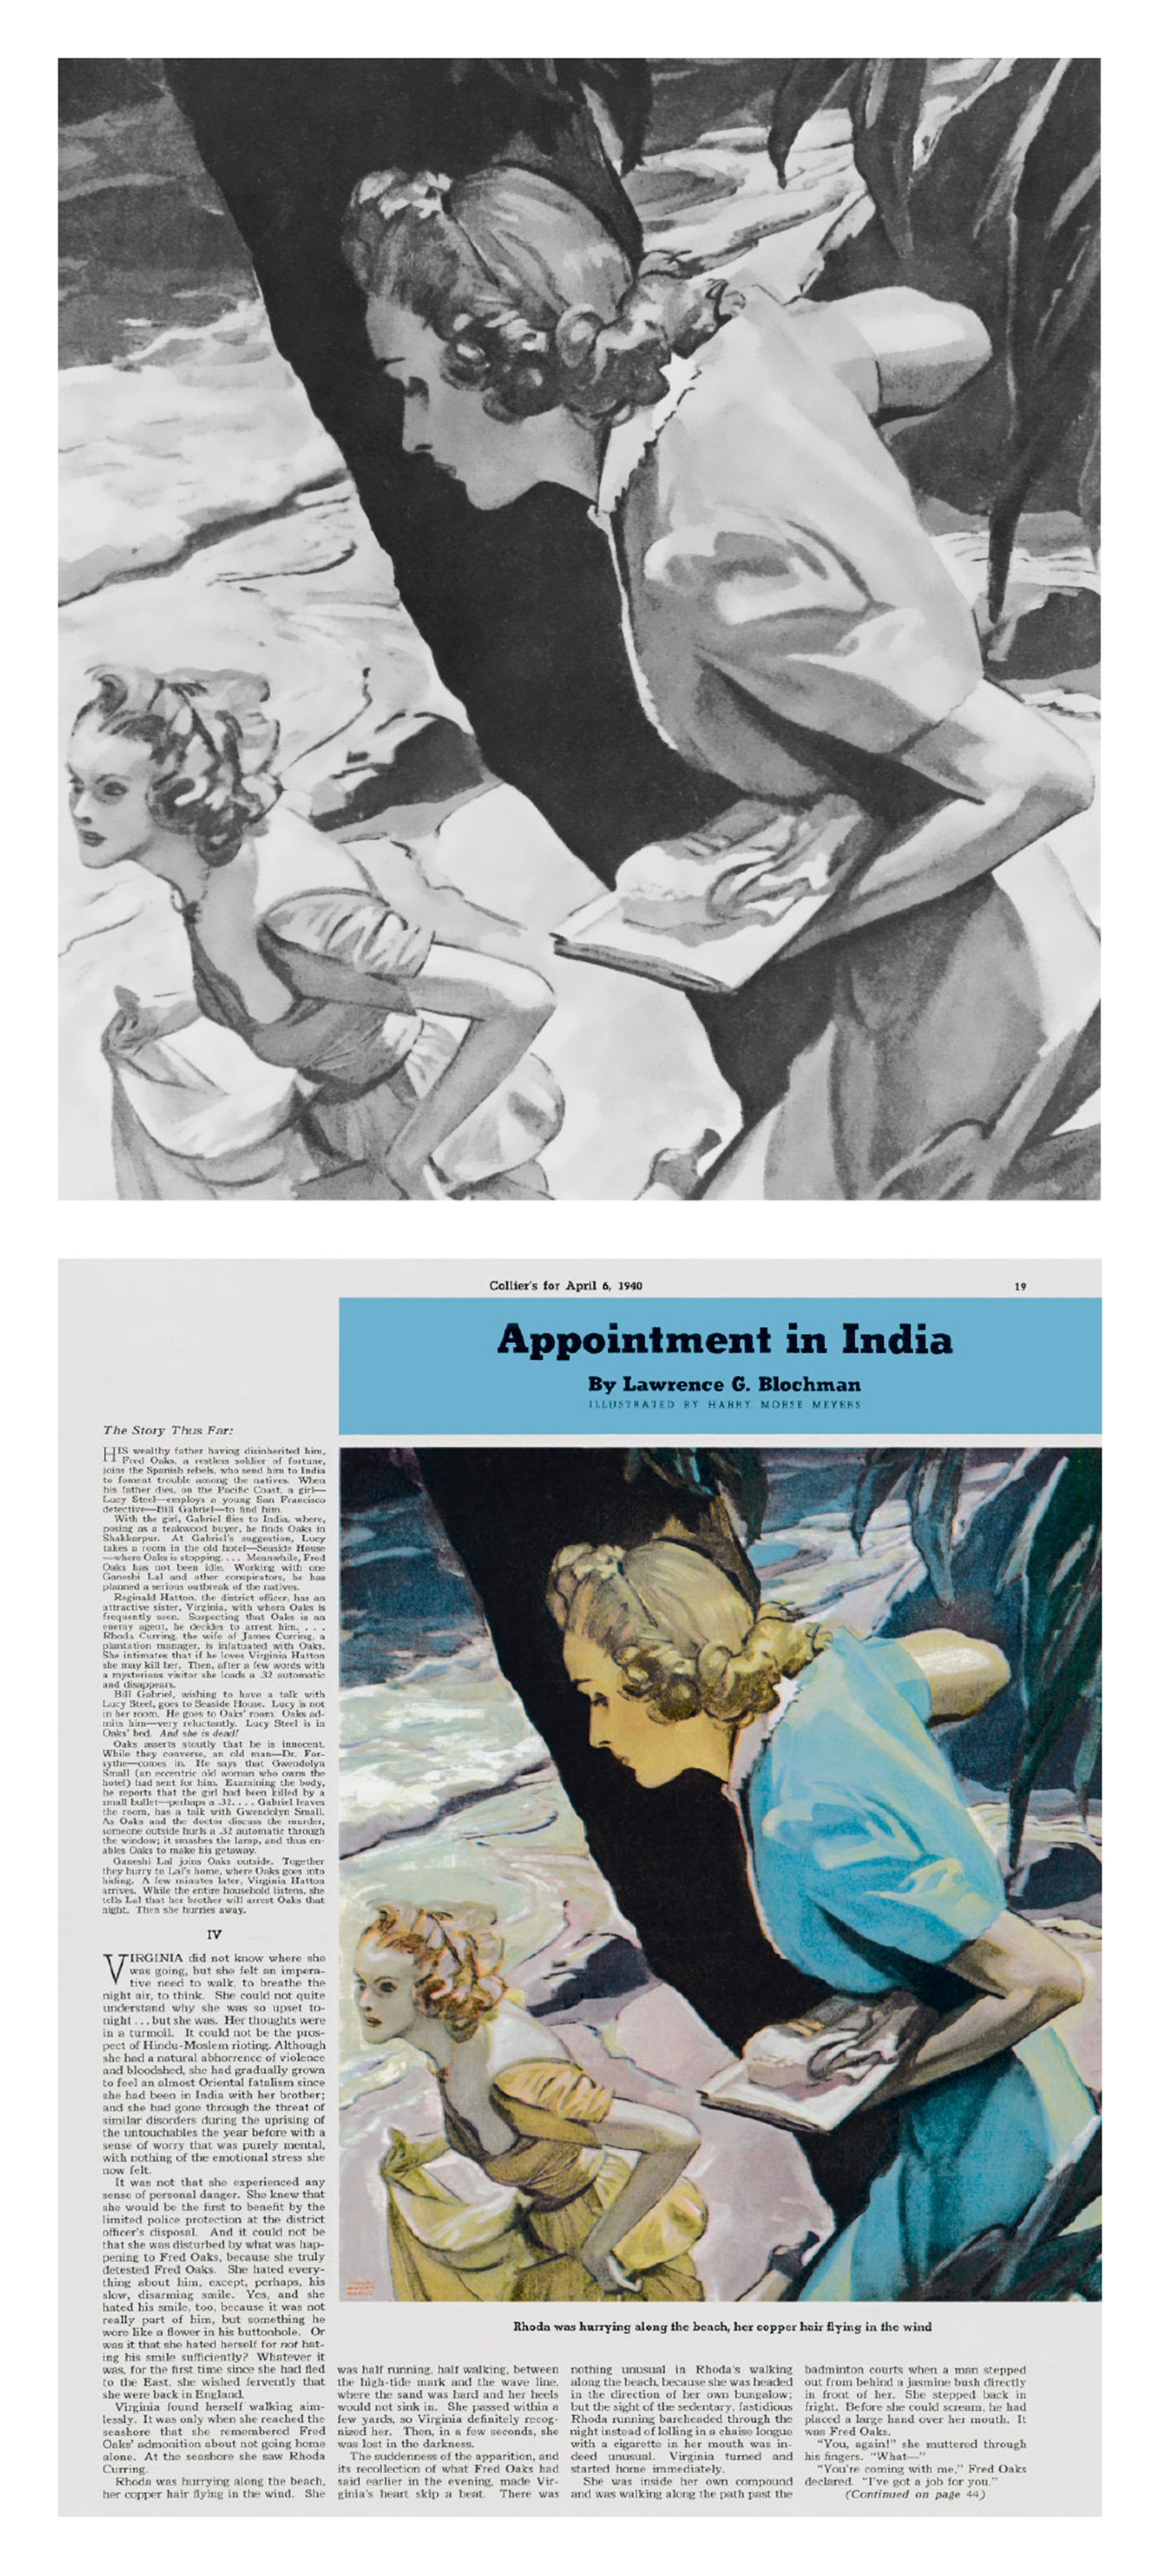 One of psychologist Christiana D. Morgan’s Thematic Apperception Tests which featured cards depicting ambiguous social situations. This card is based on an image by Harry Morse Myers that originally appeared in a 1940 issue of Collier’s as an illustration for the serialized novel, “Appointment in India.” The image is shown as Morgan rendered it and as it first appeared in Collier’s. 